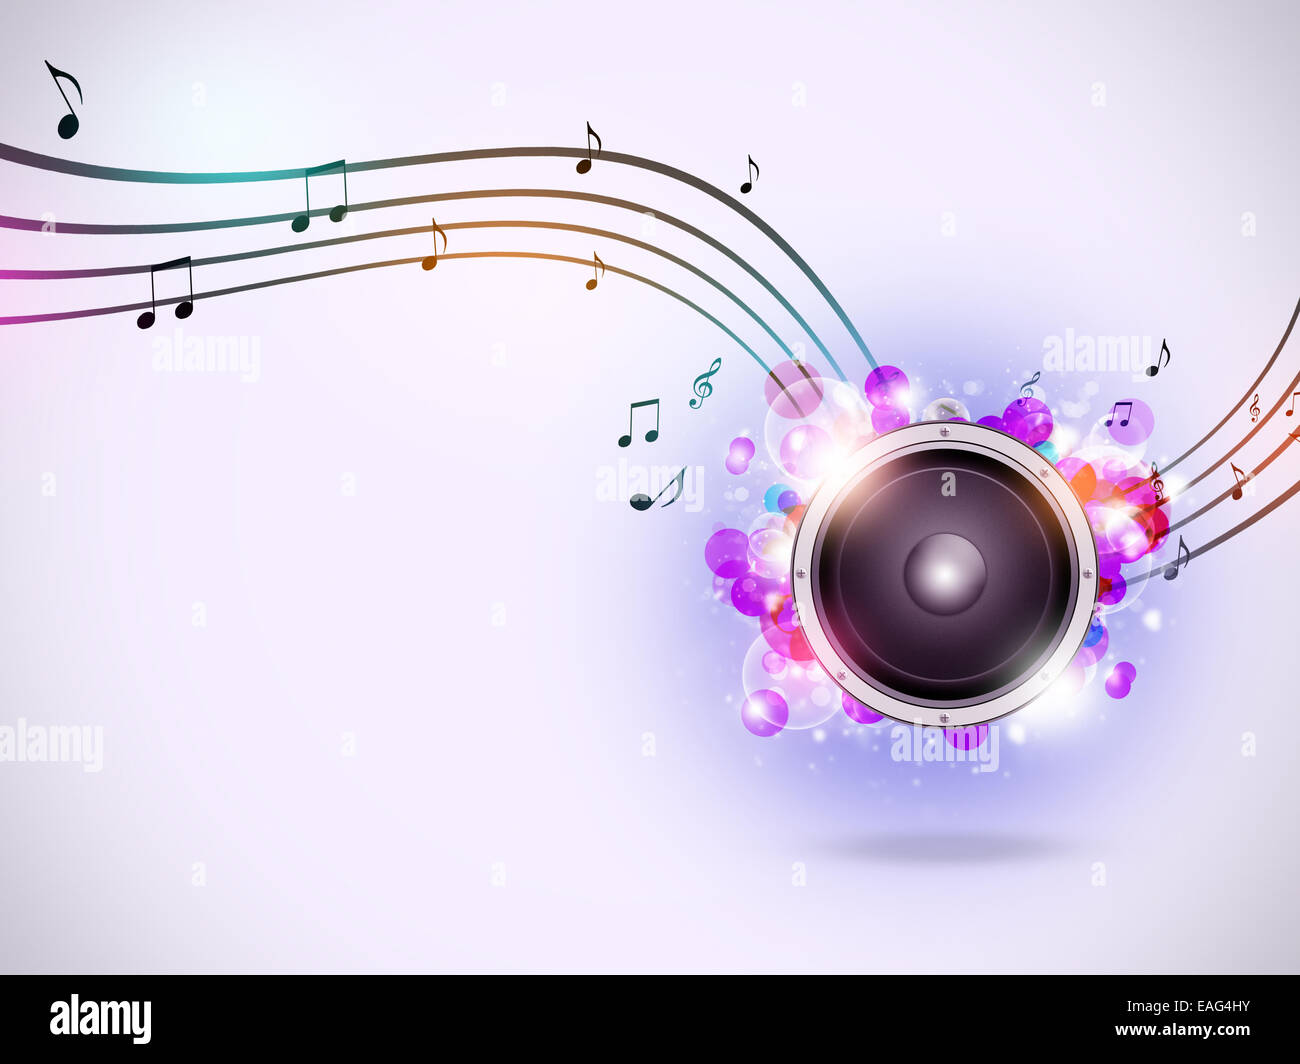 interesting abstract music background with sound speaker and blurry lights  Stock Photo - Alamy